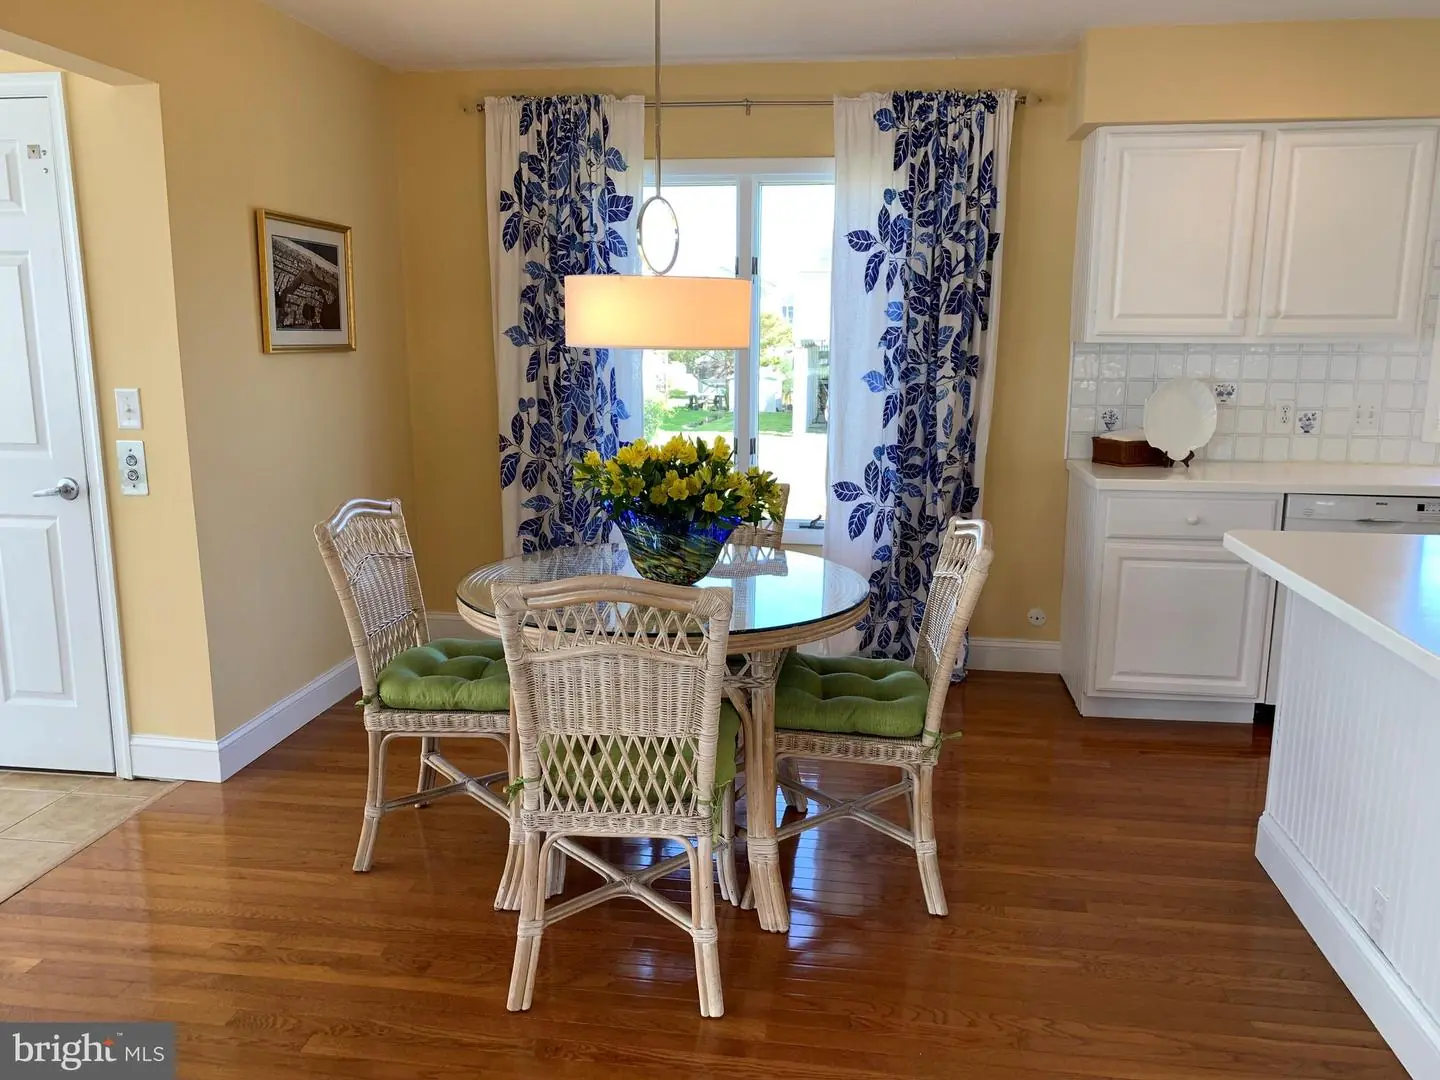 DESU164670-304207560356-2021-07-17-02-03-15 35199 Hassell Ave | Bethany Beach, DE Real Estate For Sale | MLS# Desu164670  - 1st Choice Properties